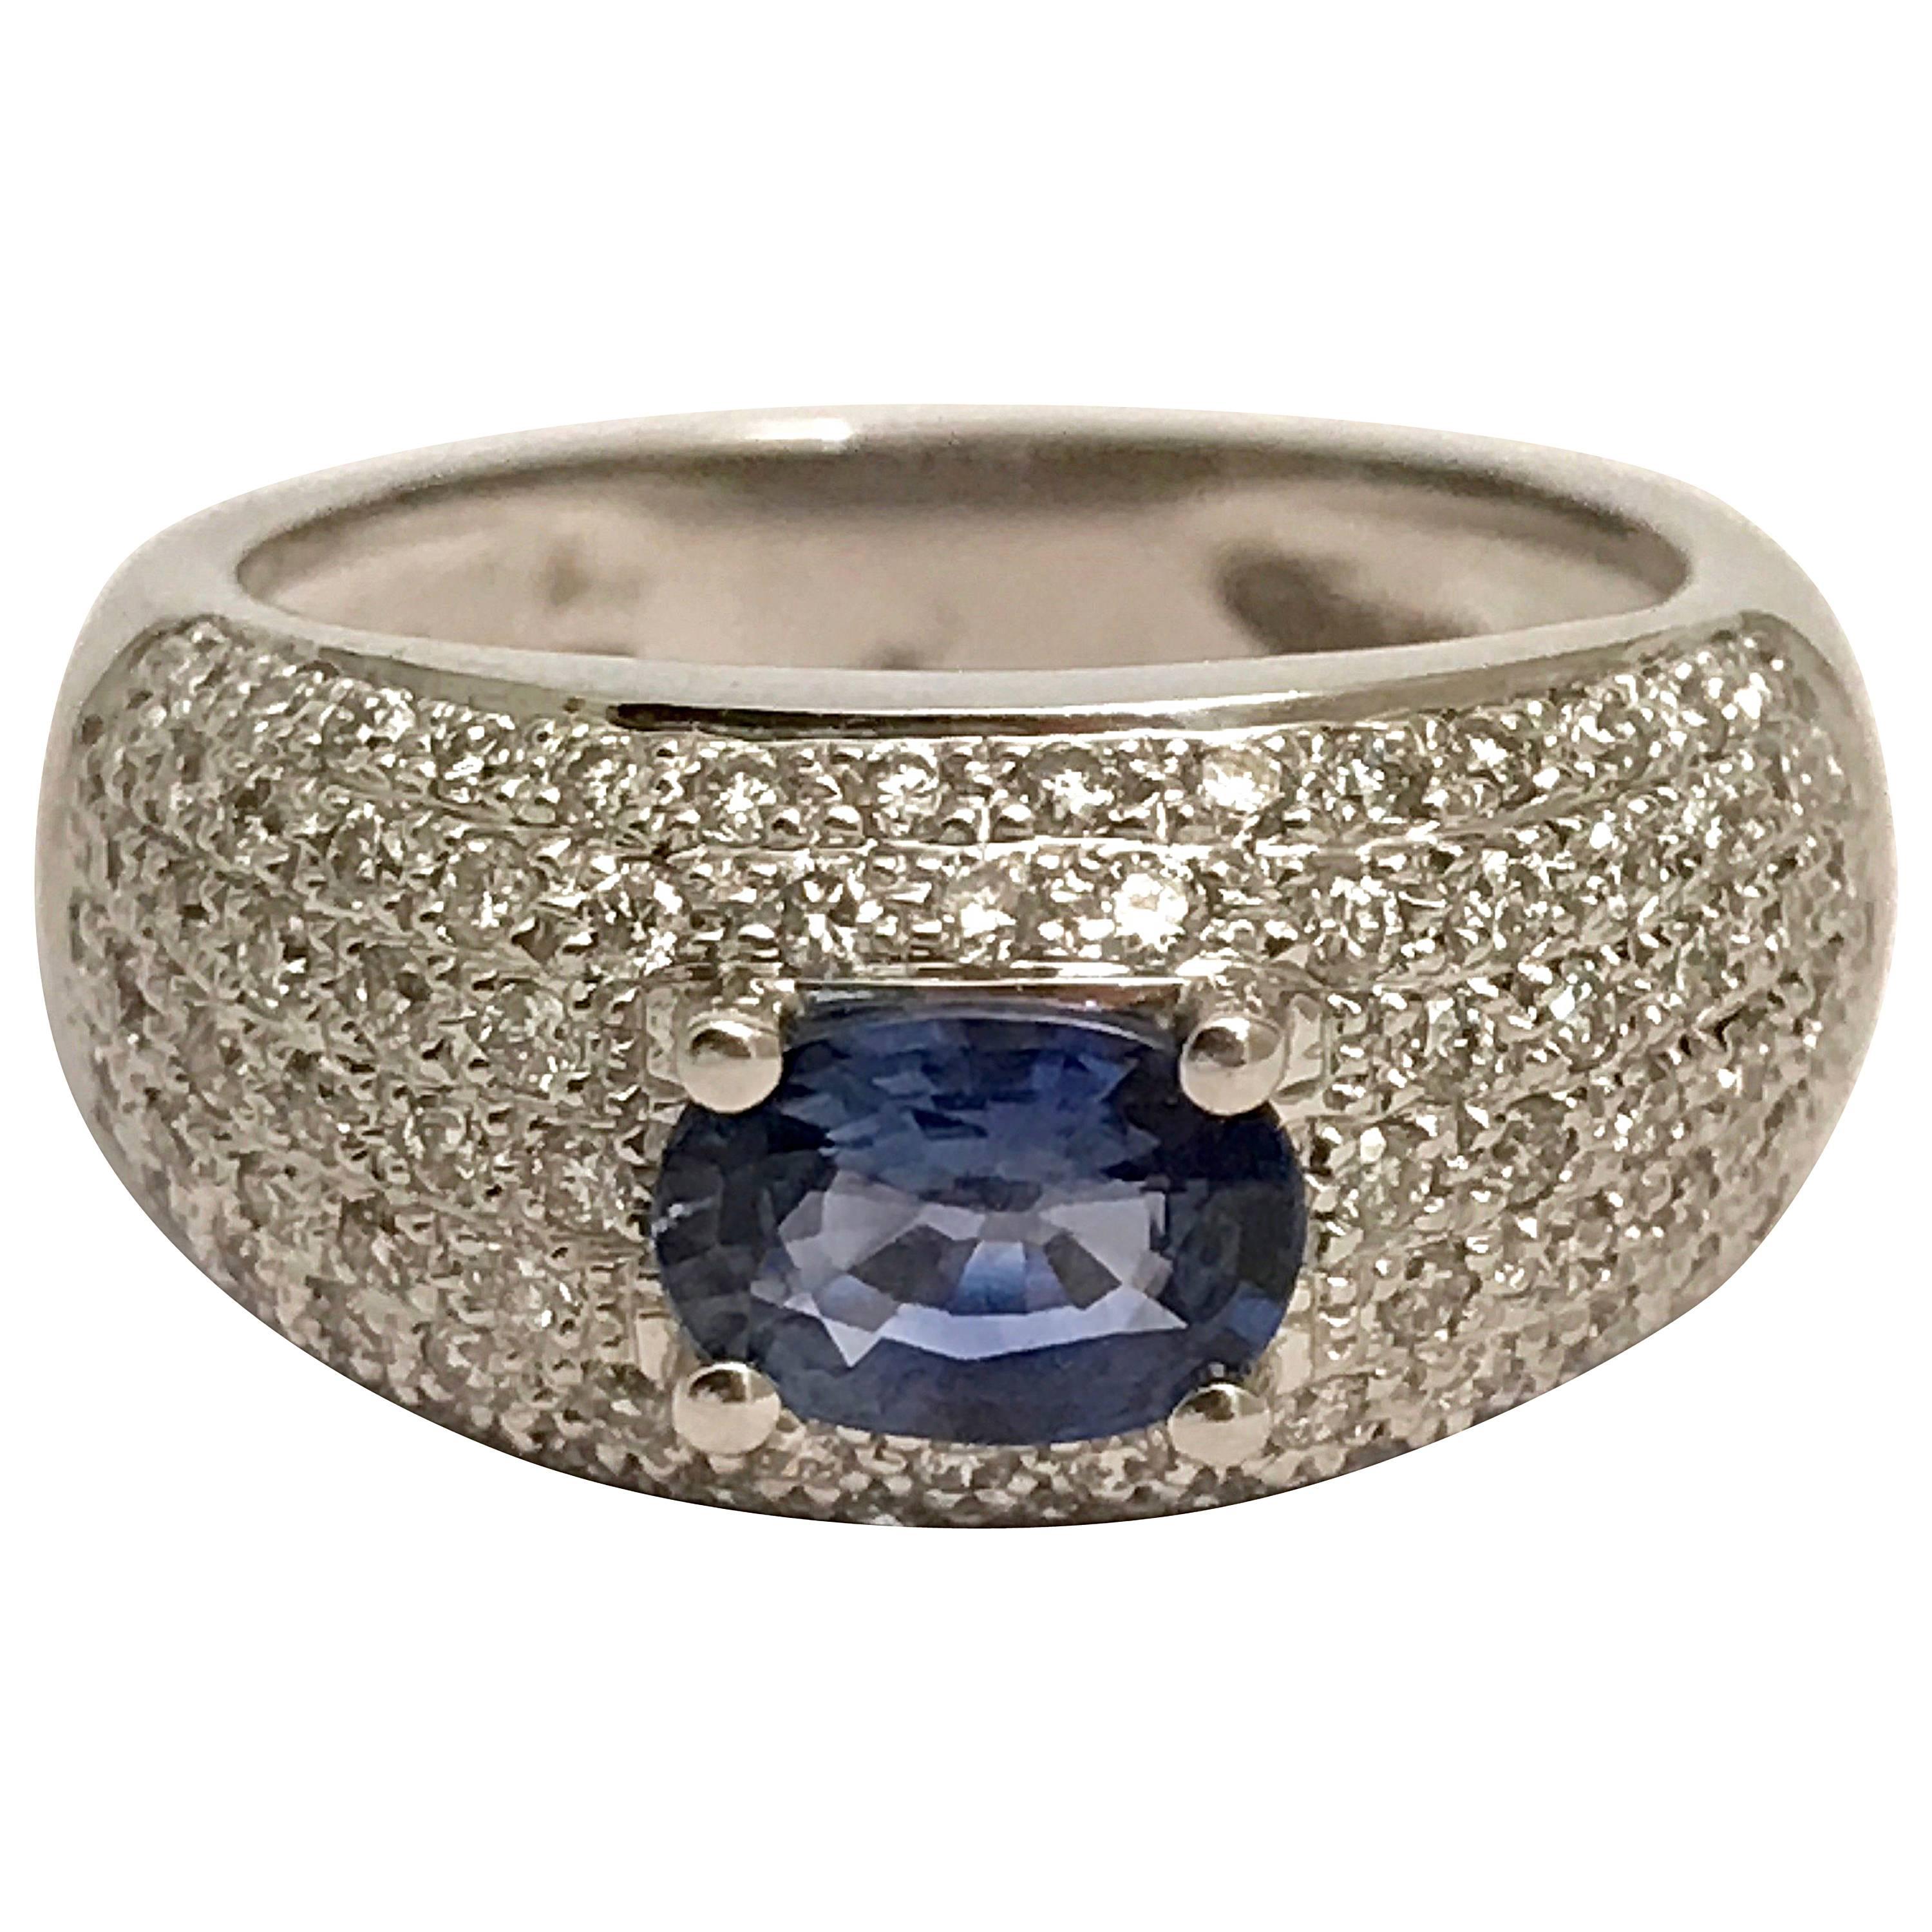 Wonderful White Gold 18 Carat Sapphire and Diamonds Cocktail Ring.
90 Diamonds 0,900 Carat Color H Purity SI Form Brilliant
Size 54
US Size 63/4